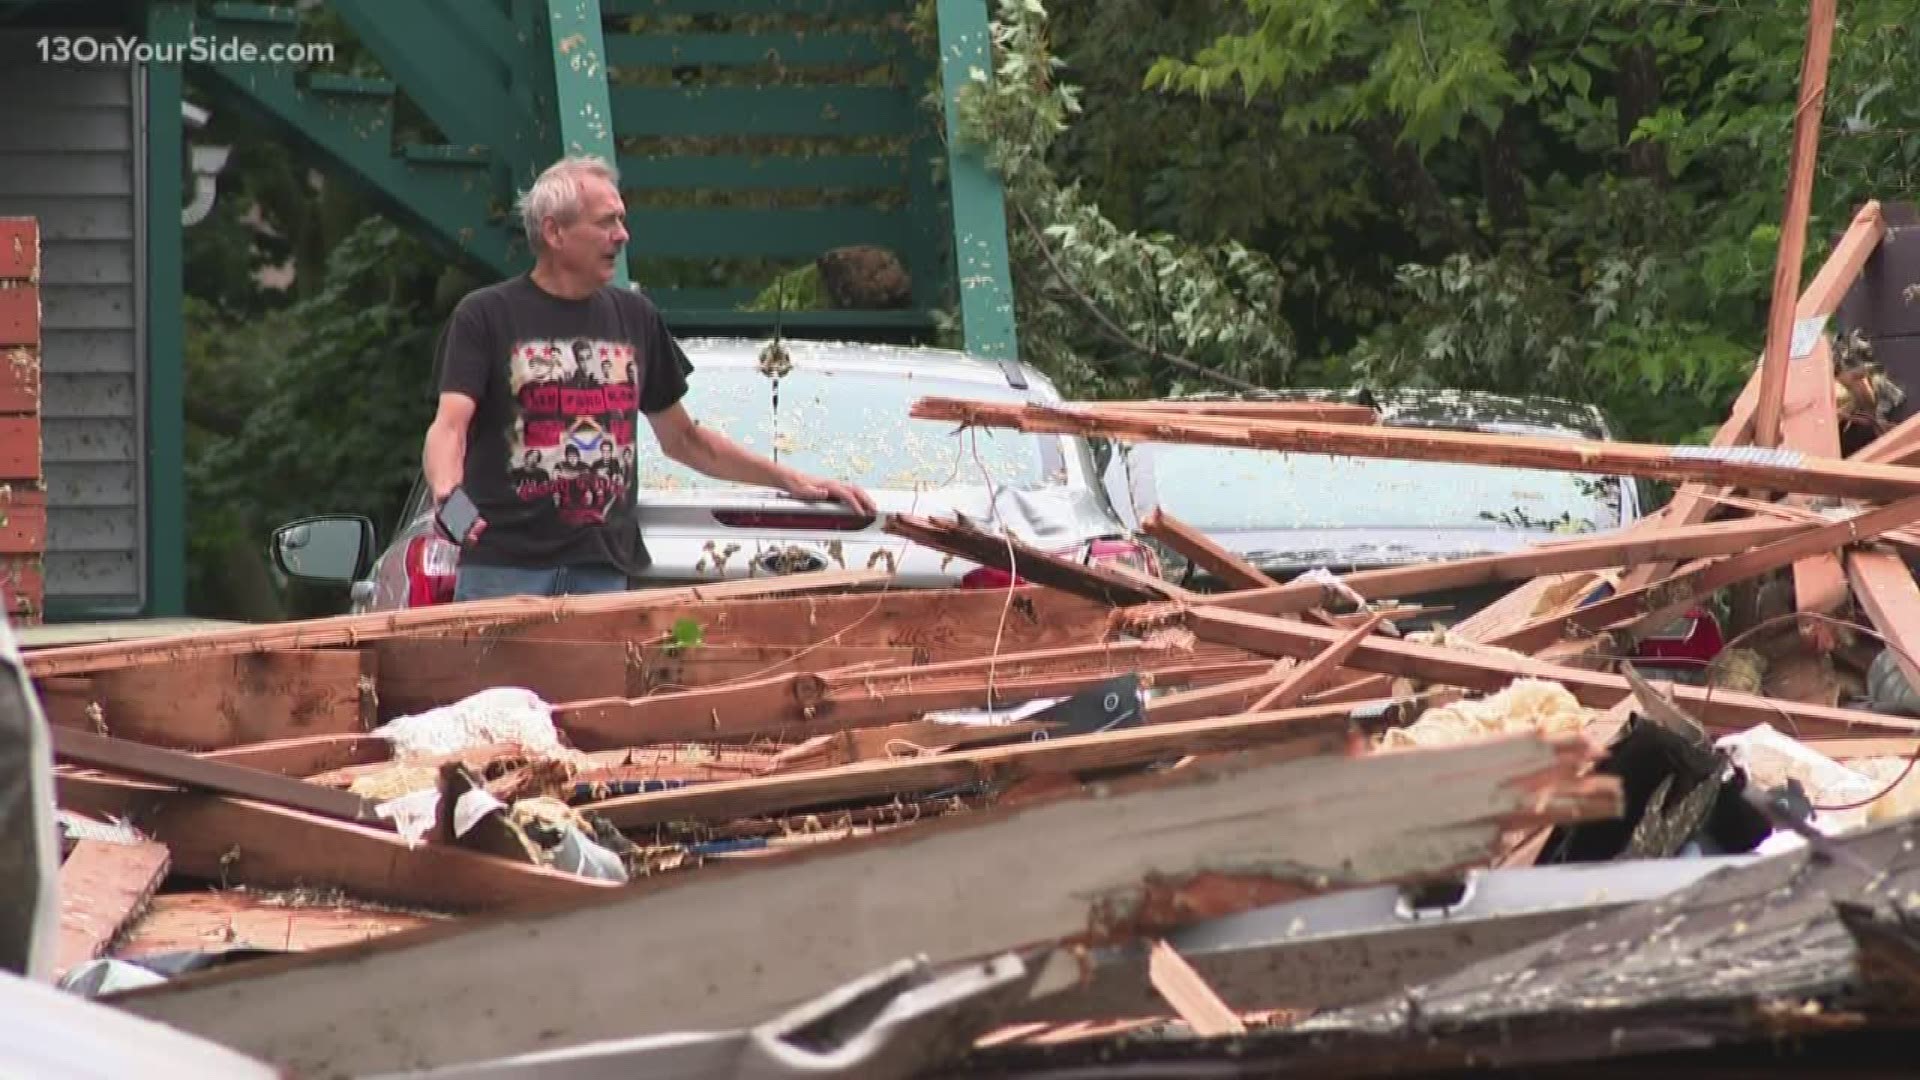 Neighbors never imagined that this kind of devastation could happen in their backyard.